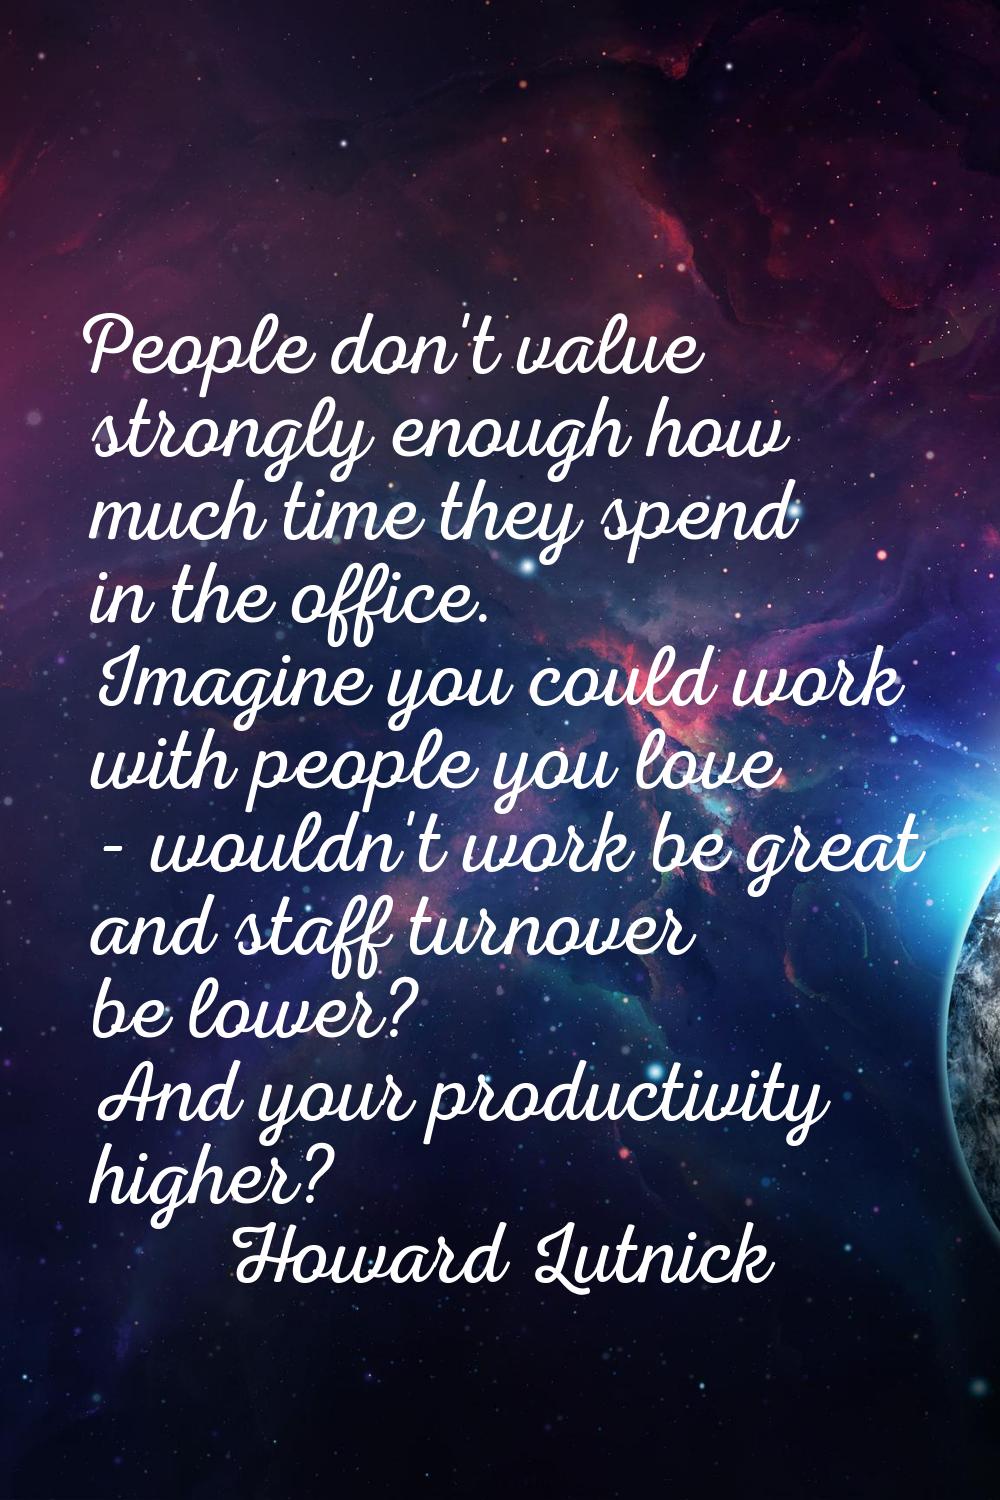 People don't value strongly enough how much time they spend in the office. Imagine you could work w